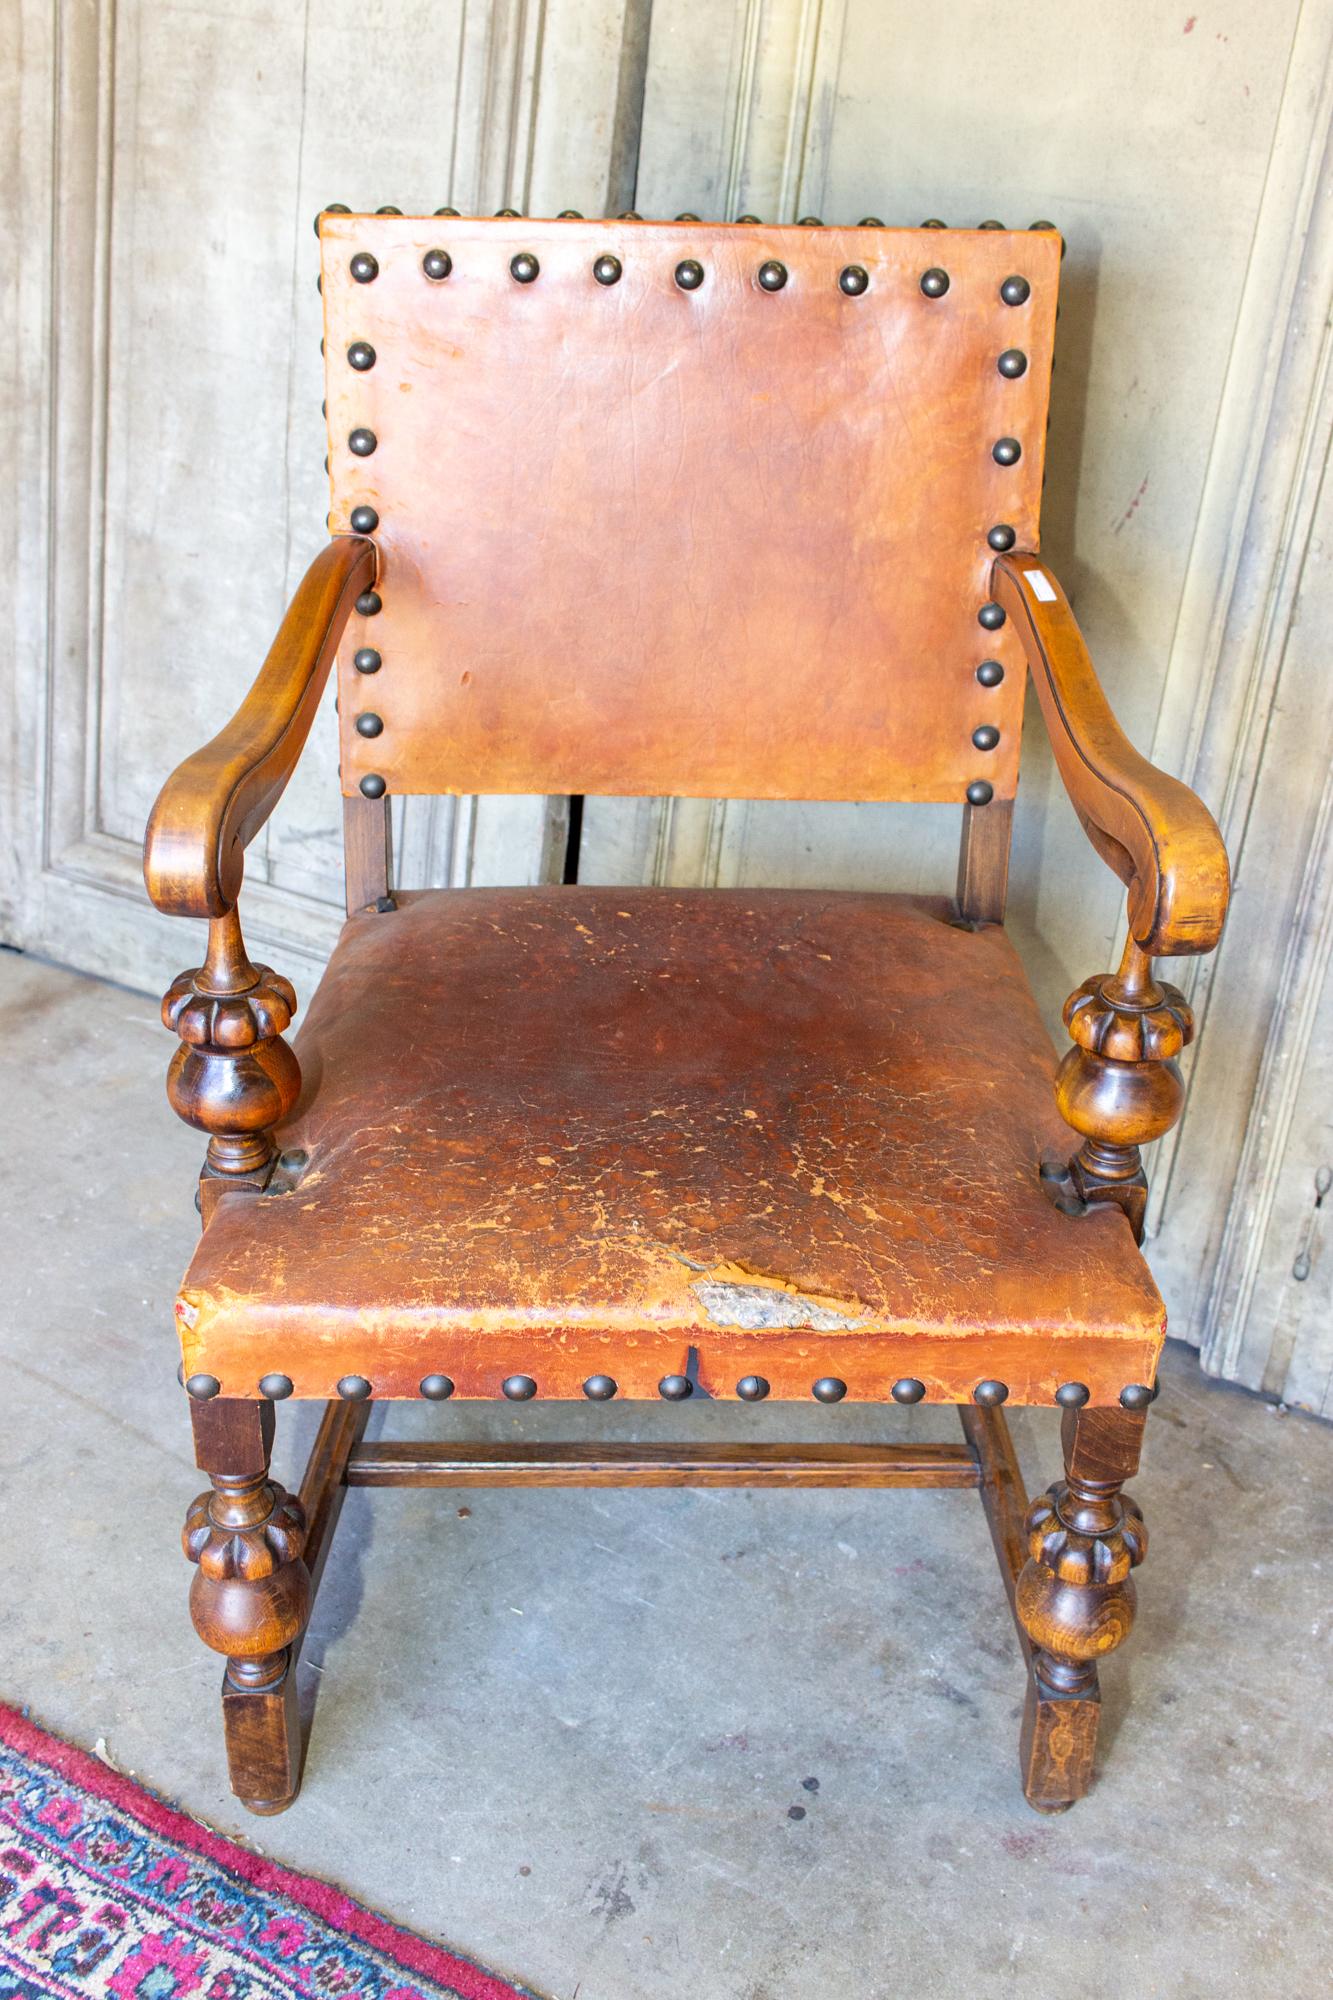 This is an antique Spanish wood & leather armchair with beautiful carvings in the frame and patinated brass nailhead details. The leather is a rich deep cognac color and does have wear, patination and there is a tear on the front edge of the seat.